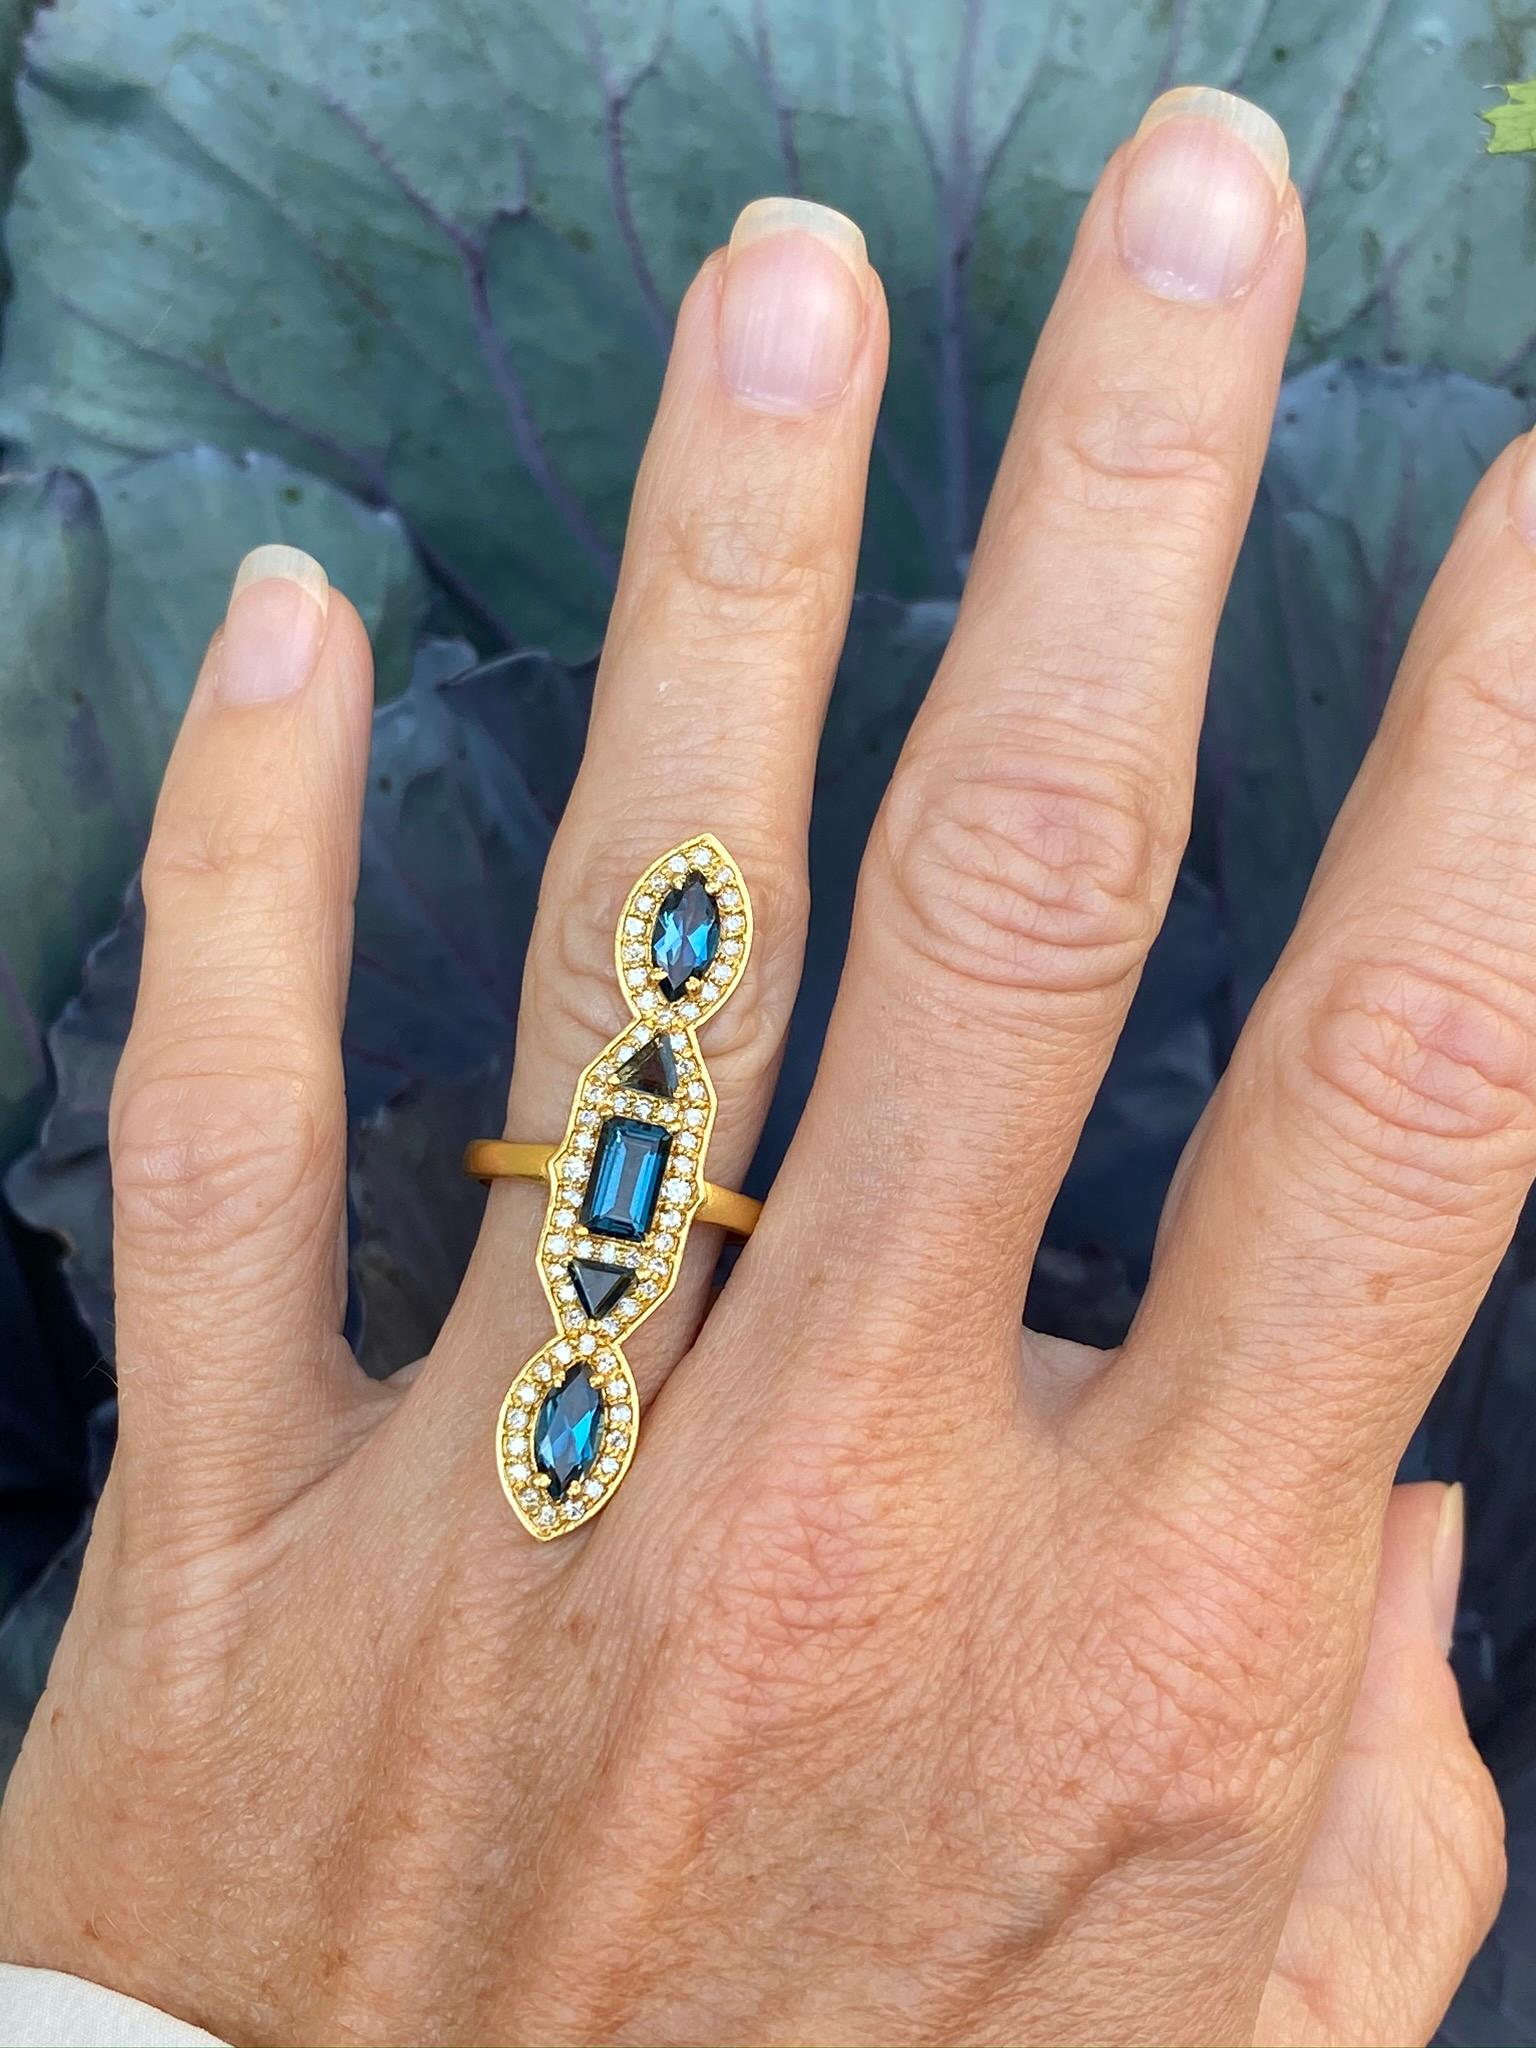 Designed by award winning jewelry designer, Lauren Harper, this 2.62 carat London Blue Topaz and .45 carat Diamond statement ring is made in 18kt Gold. Size 6.5. Can be made in any size as a special order. Also can be made in Pink Tourmaline as